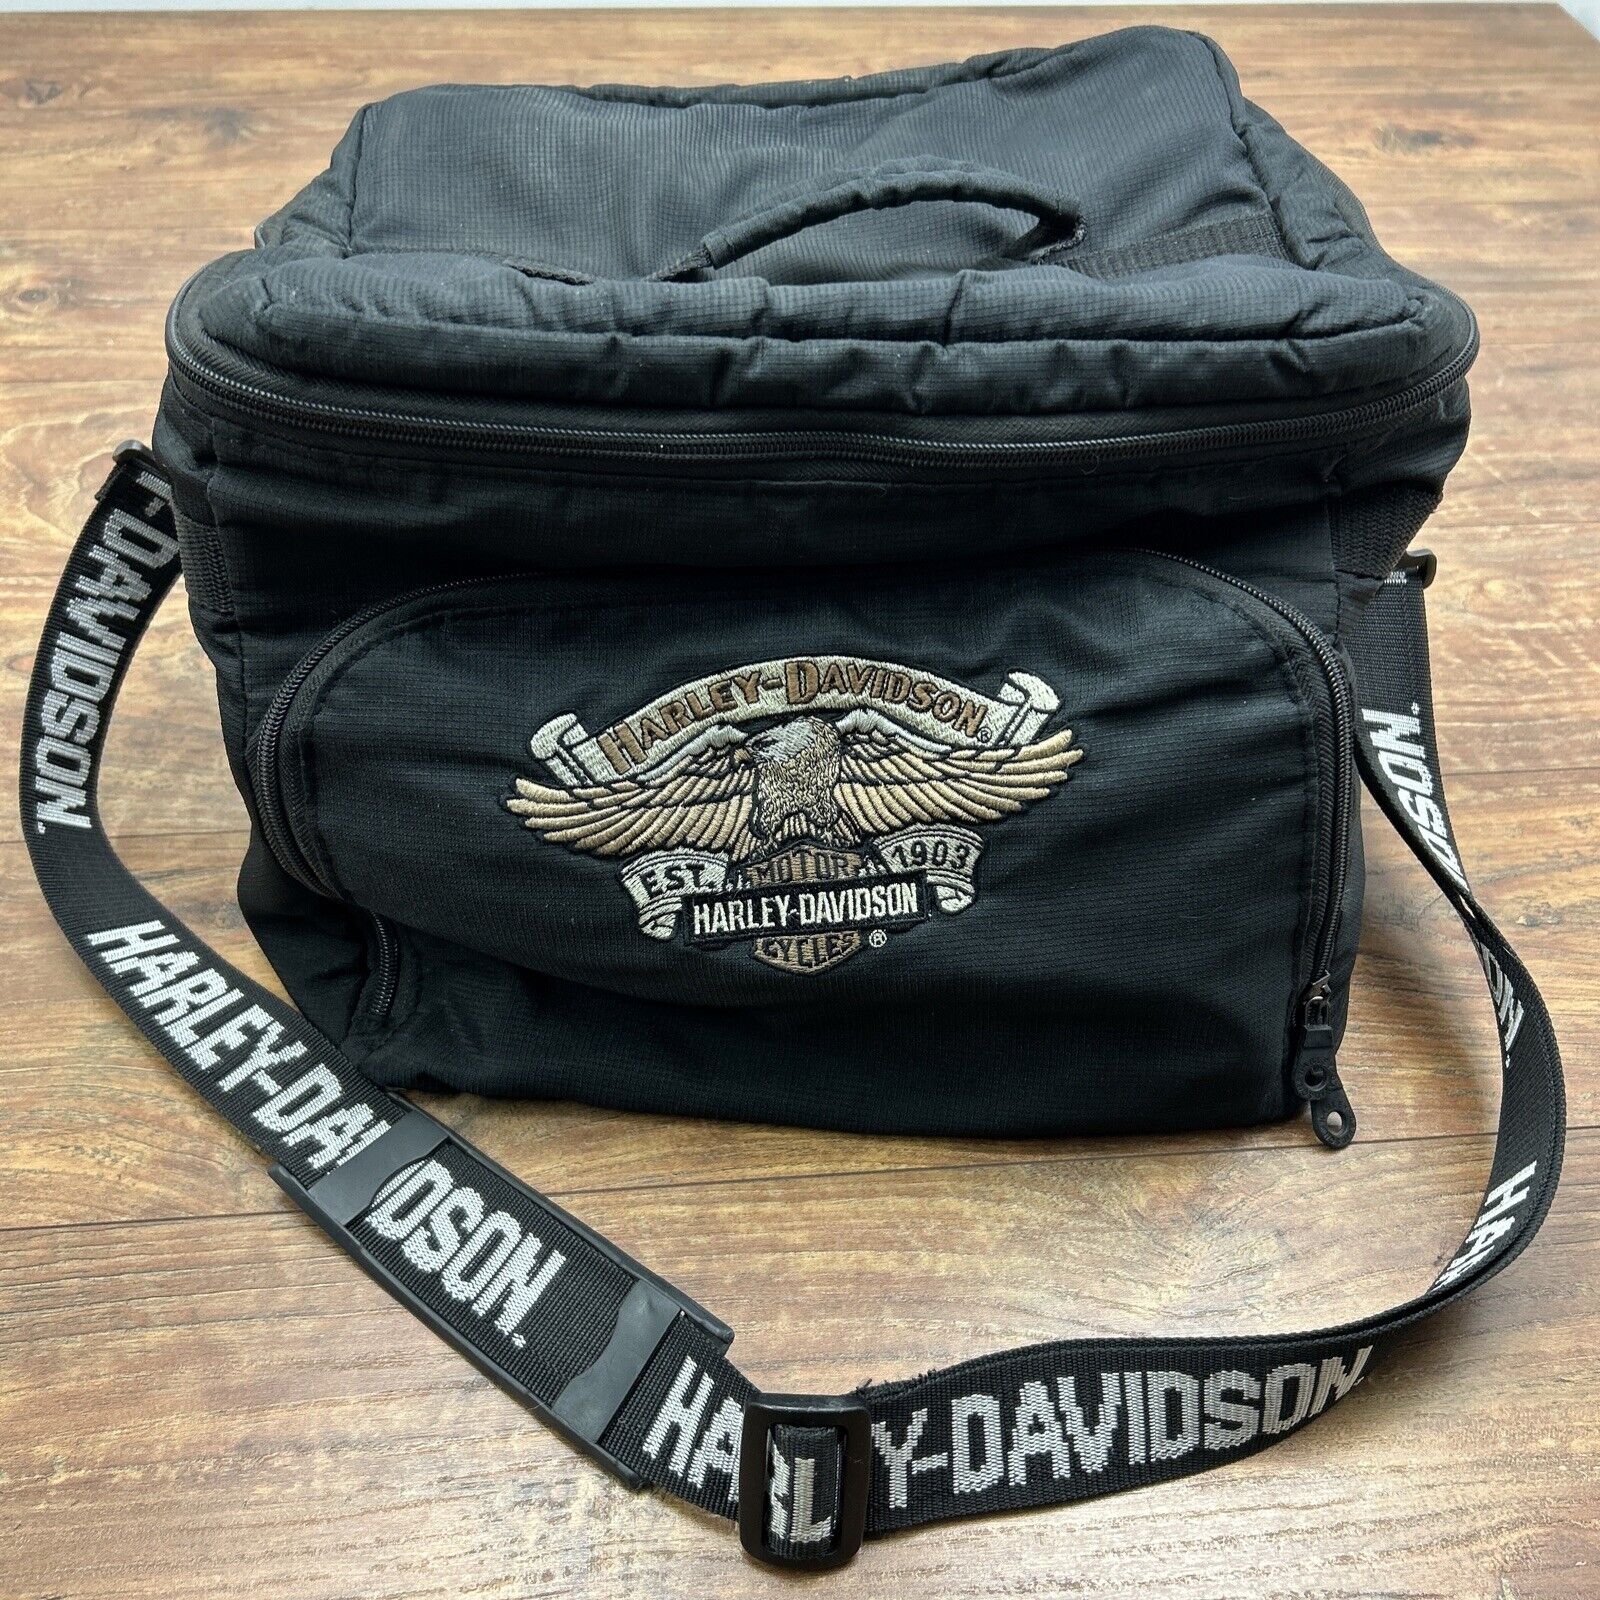 Harley Davidson Classic Insulated Cooler Bag Lunch Tote Embroidered Black